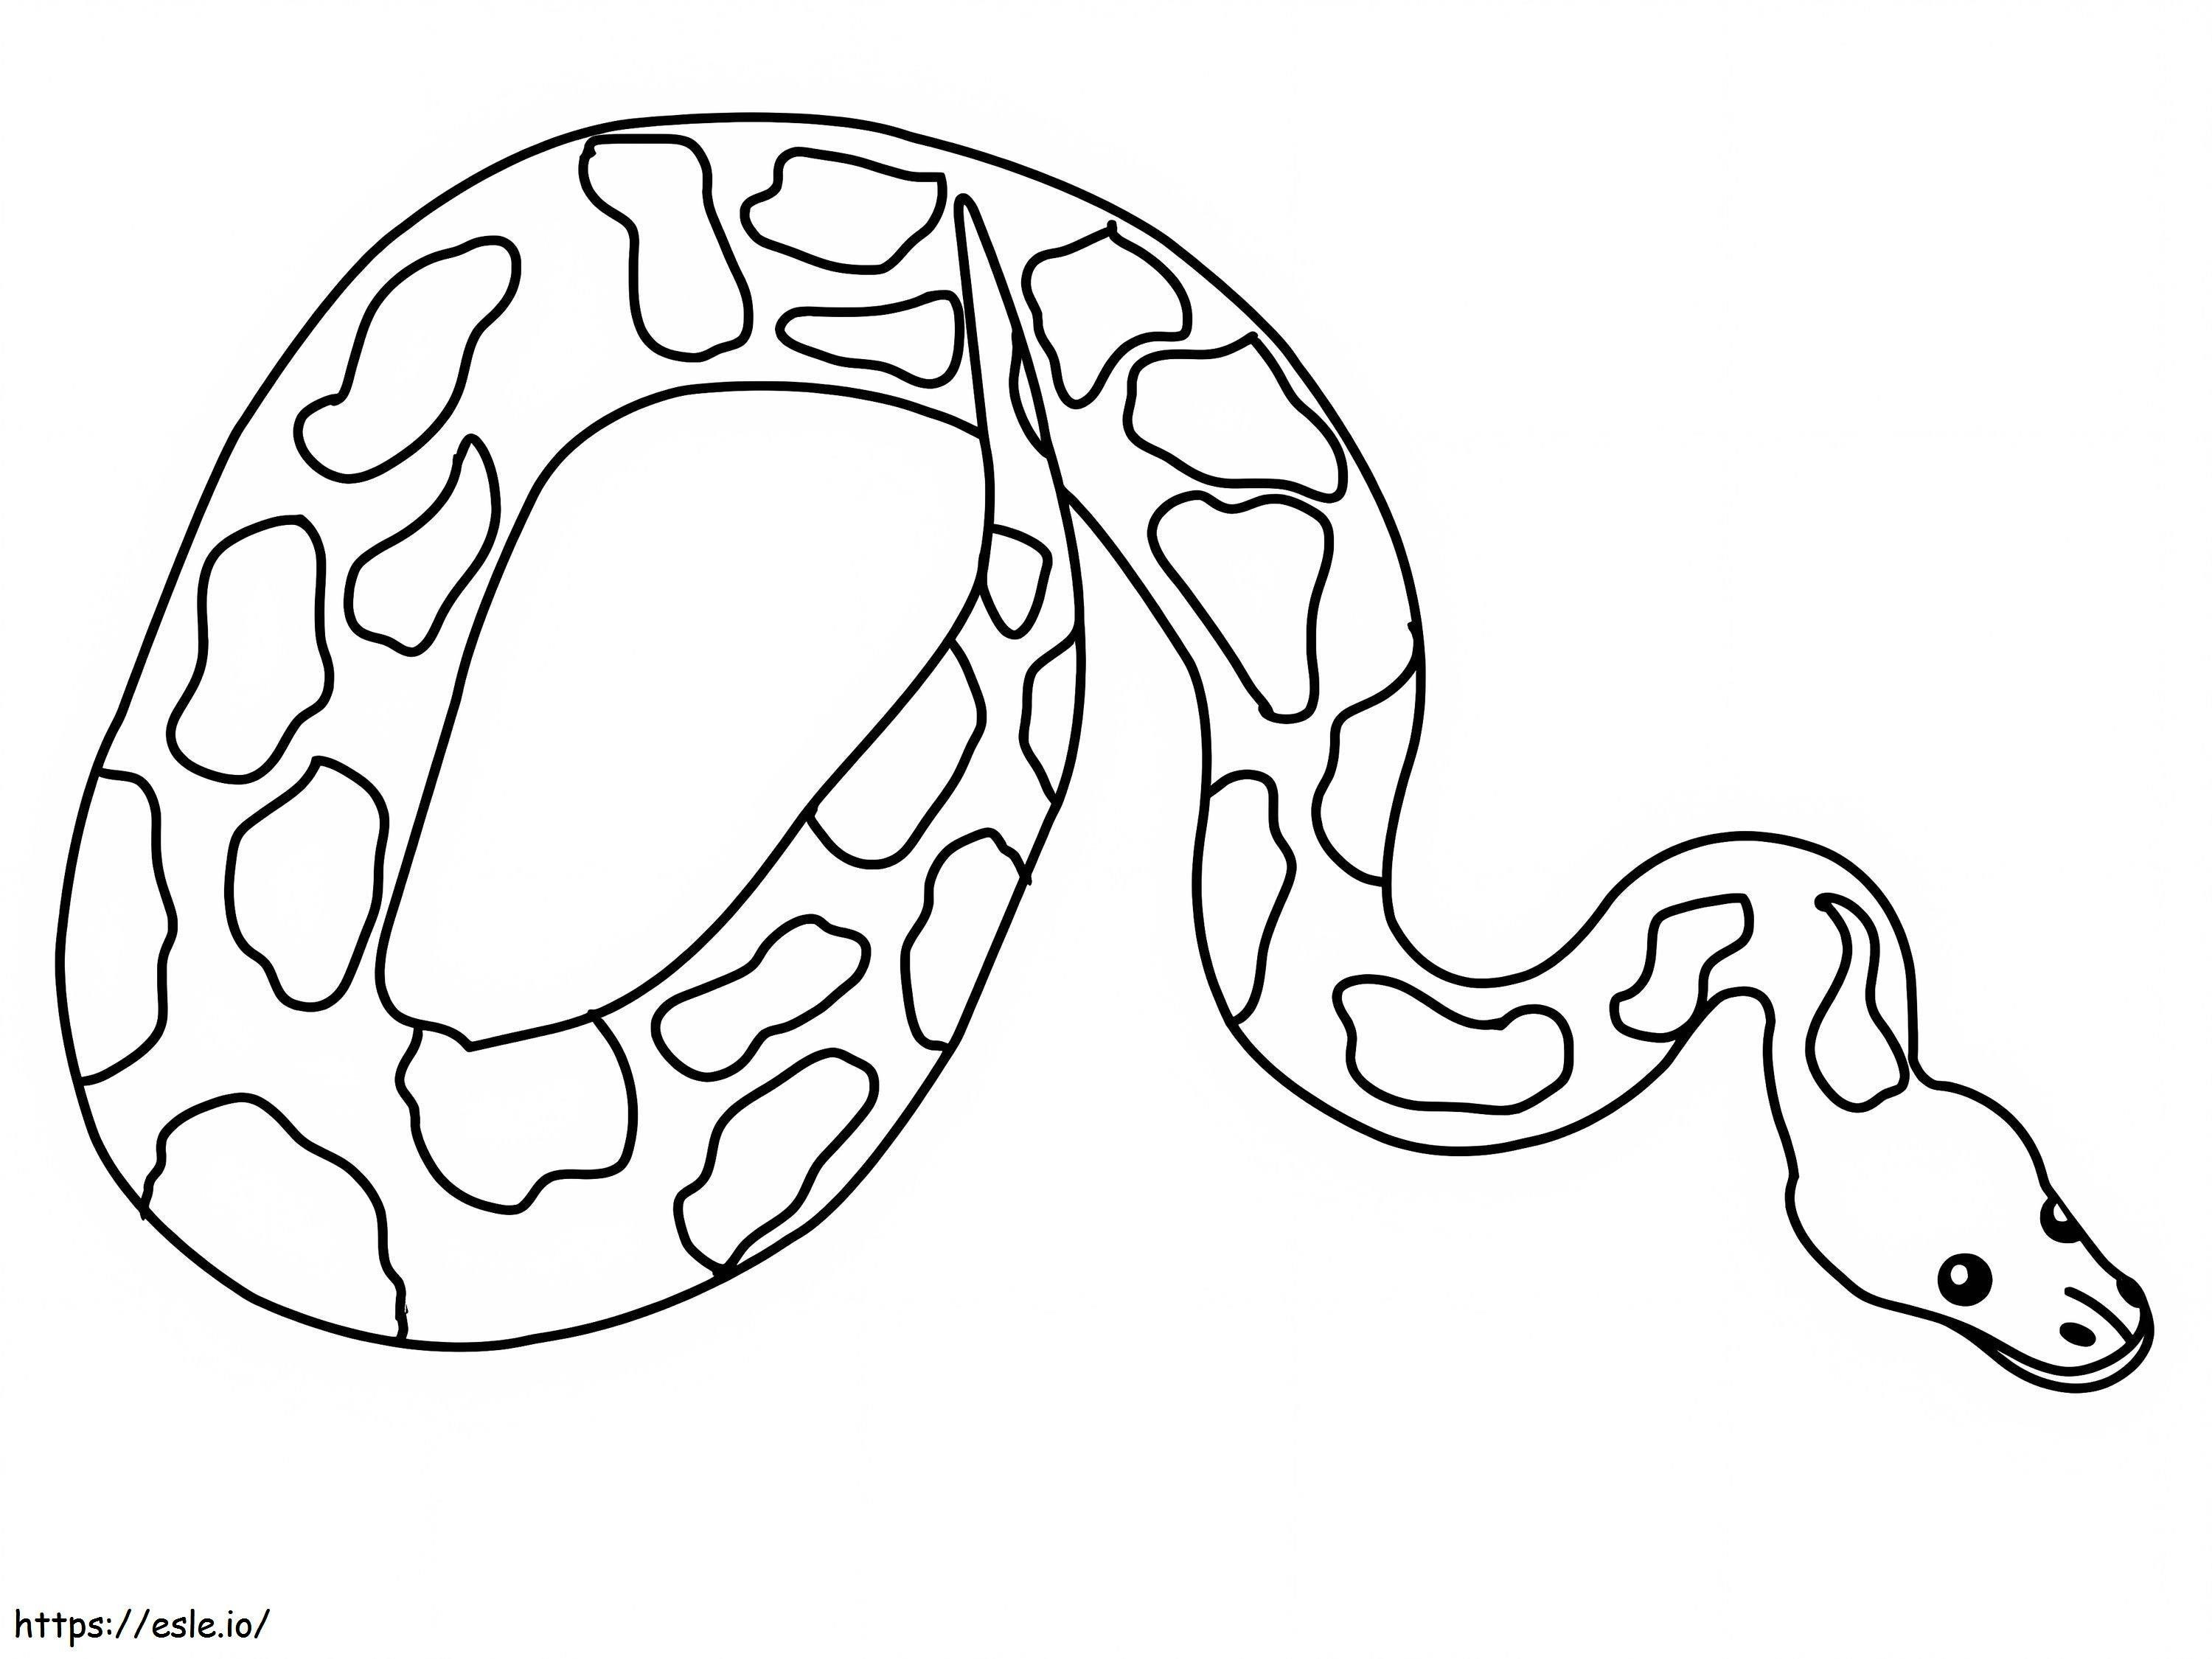 Python Normal coloring page